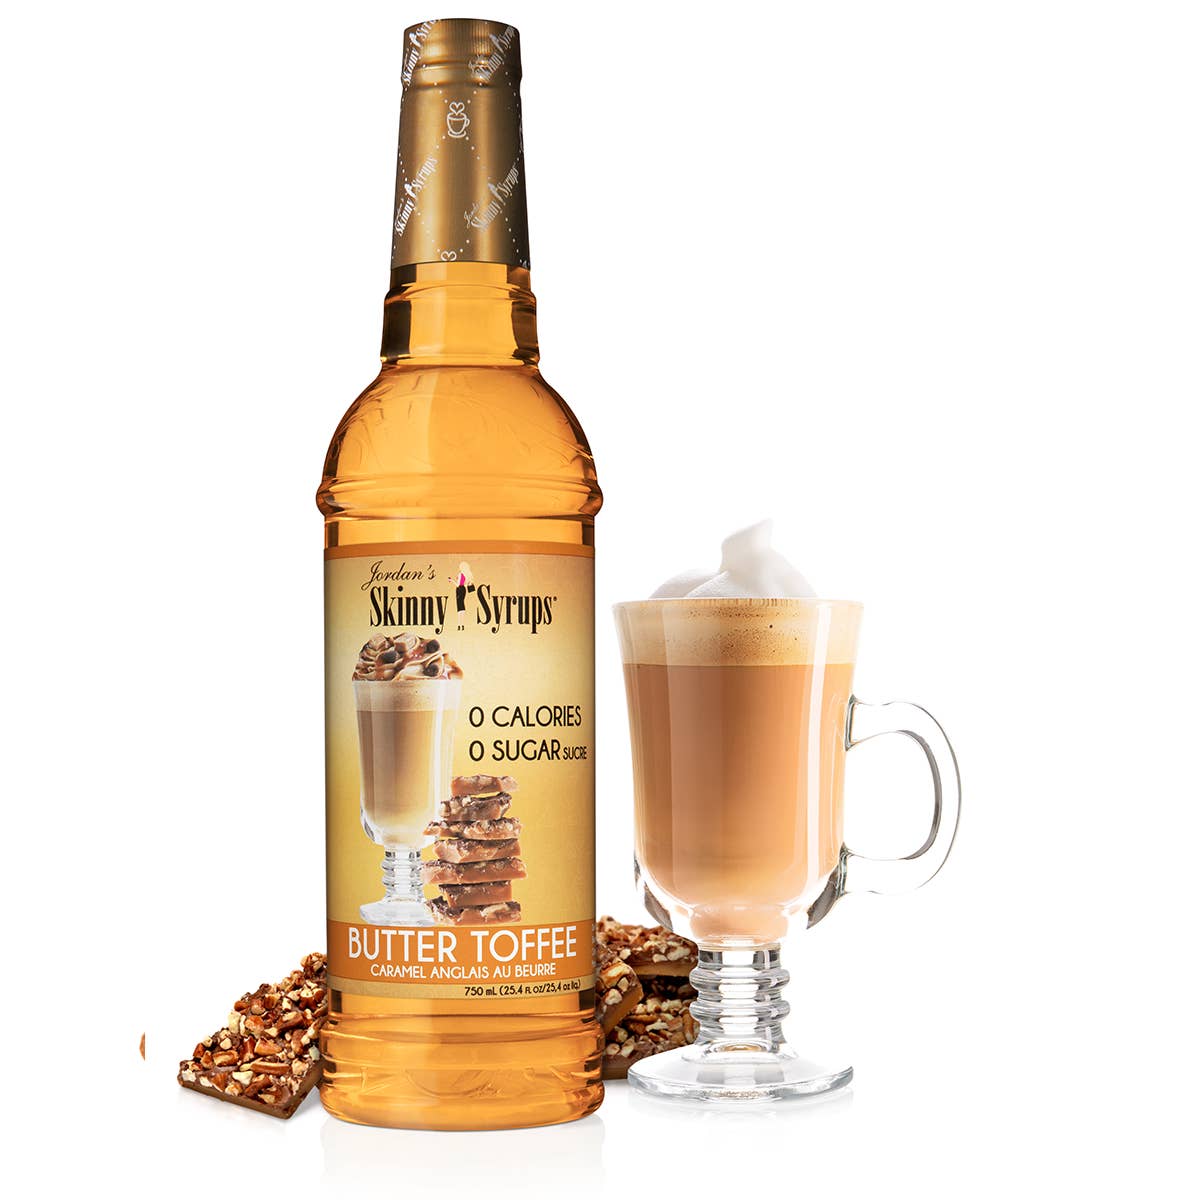 Sugar Free Butter Toffee Skinny Syrup